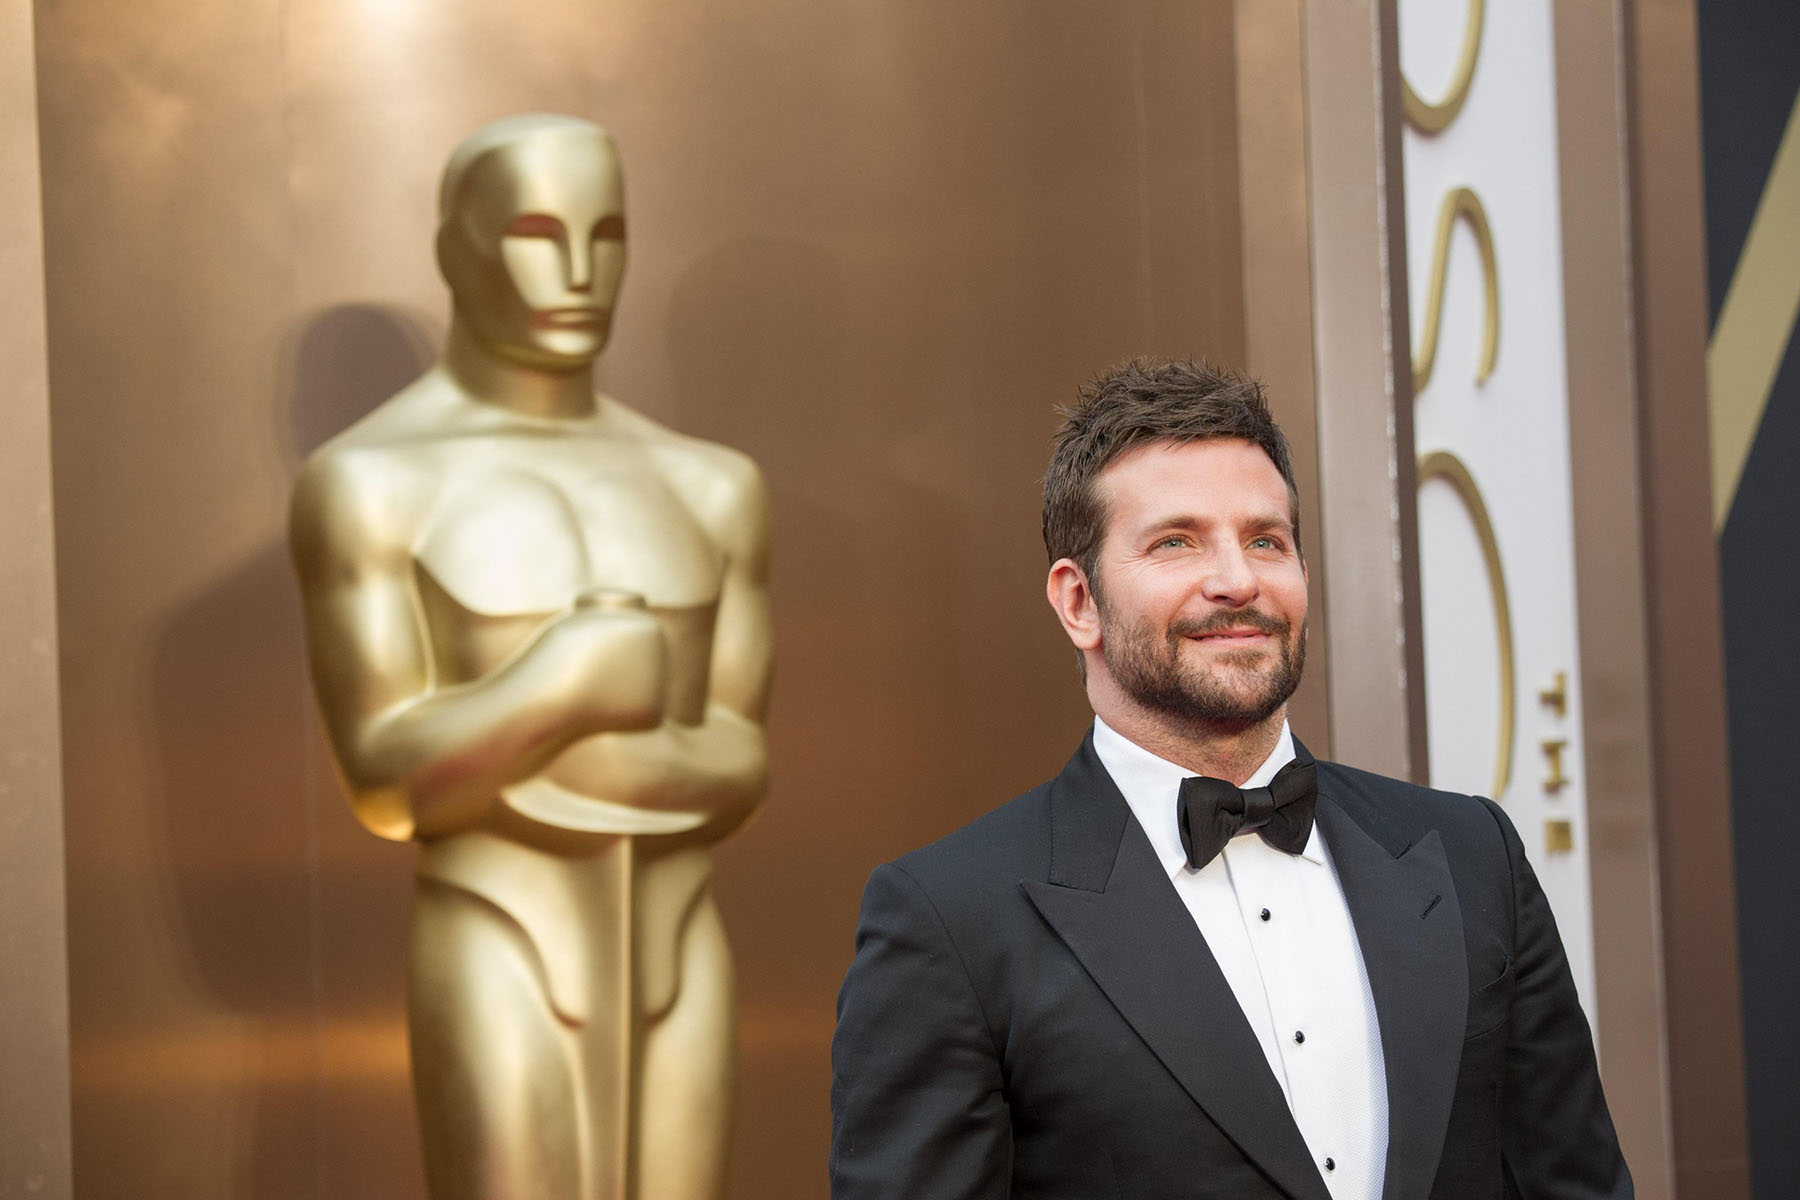 Bradley Cooper, dressed in a tux, smiles while a giant golden Oscar statute stands behind him.